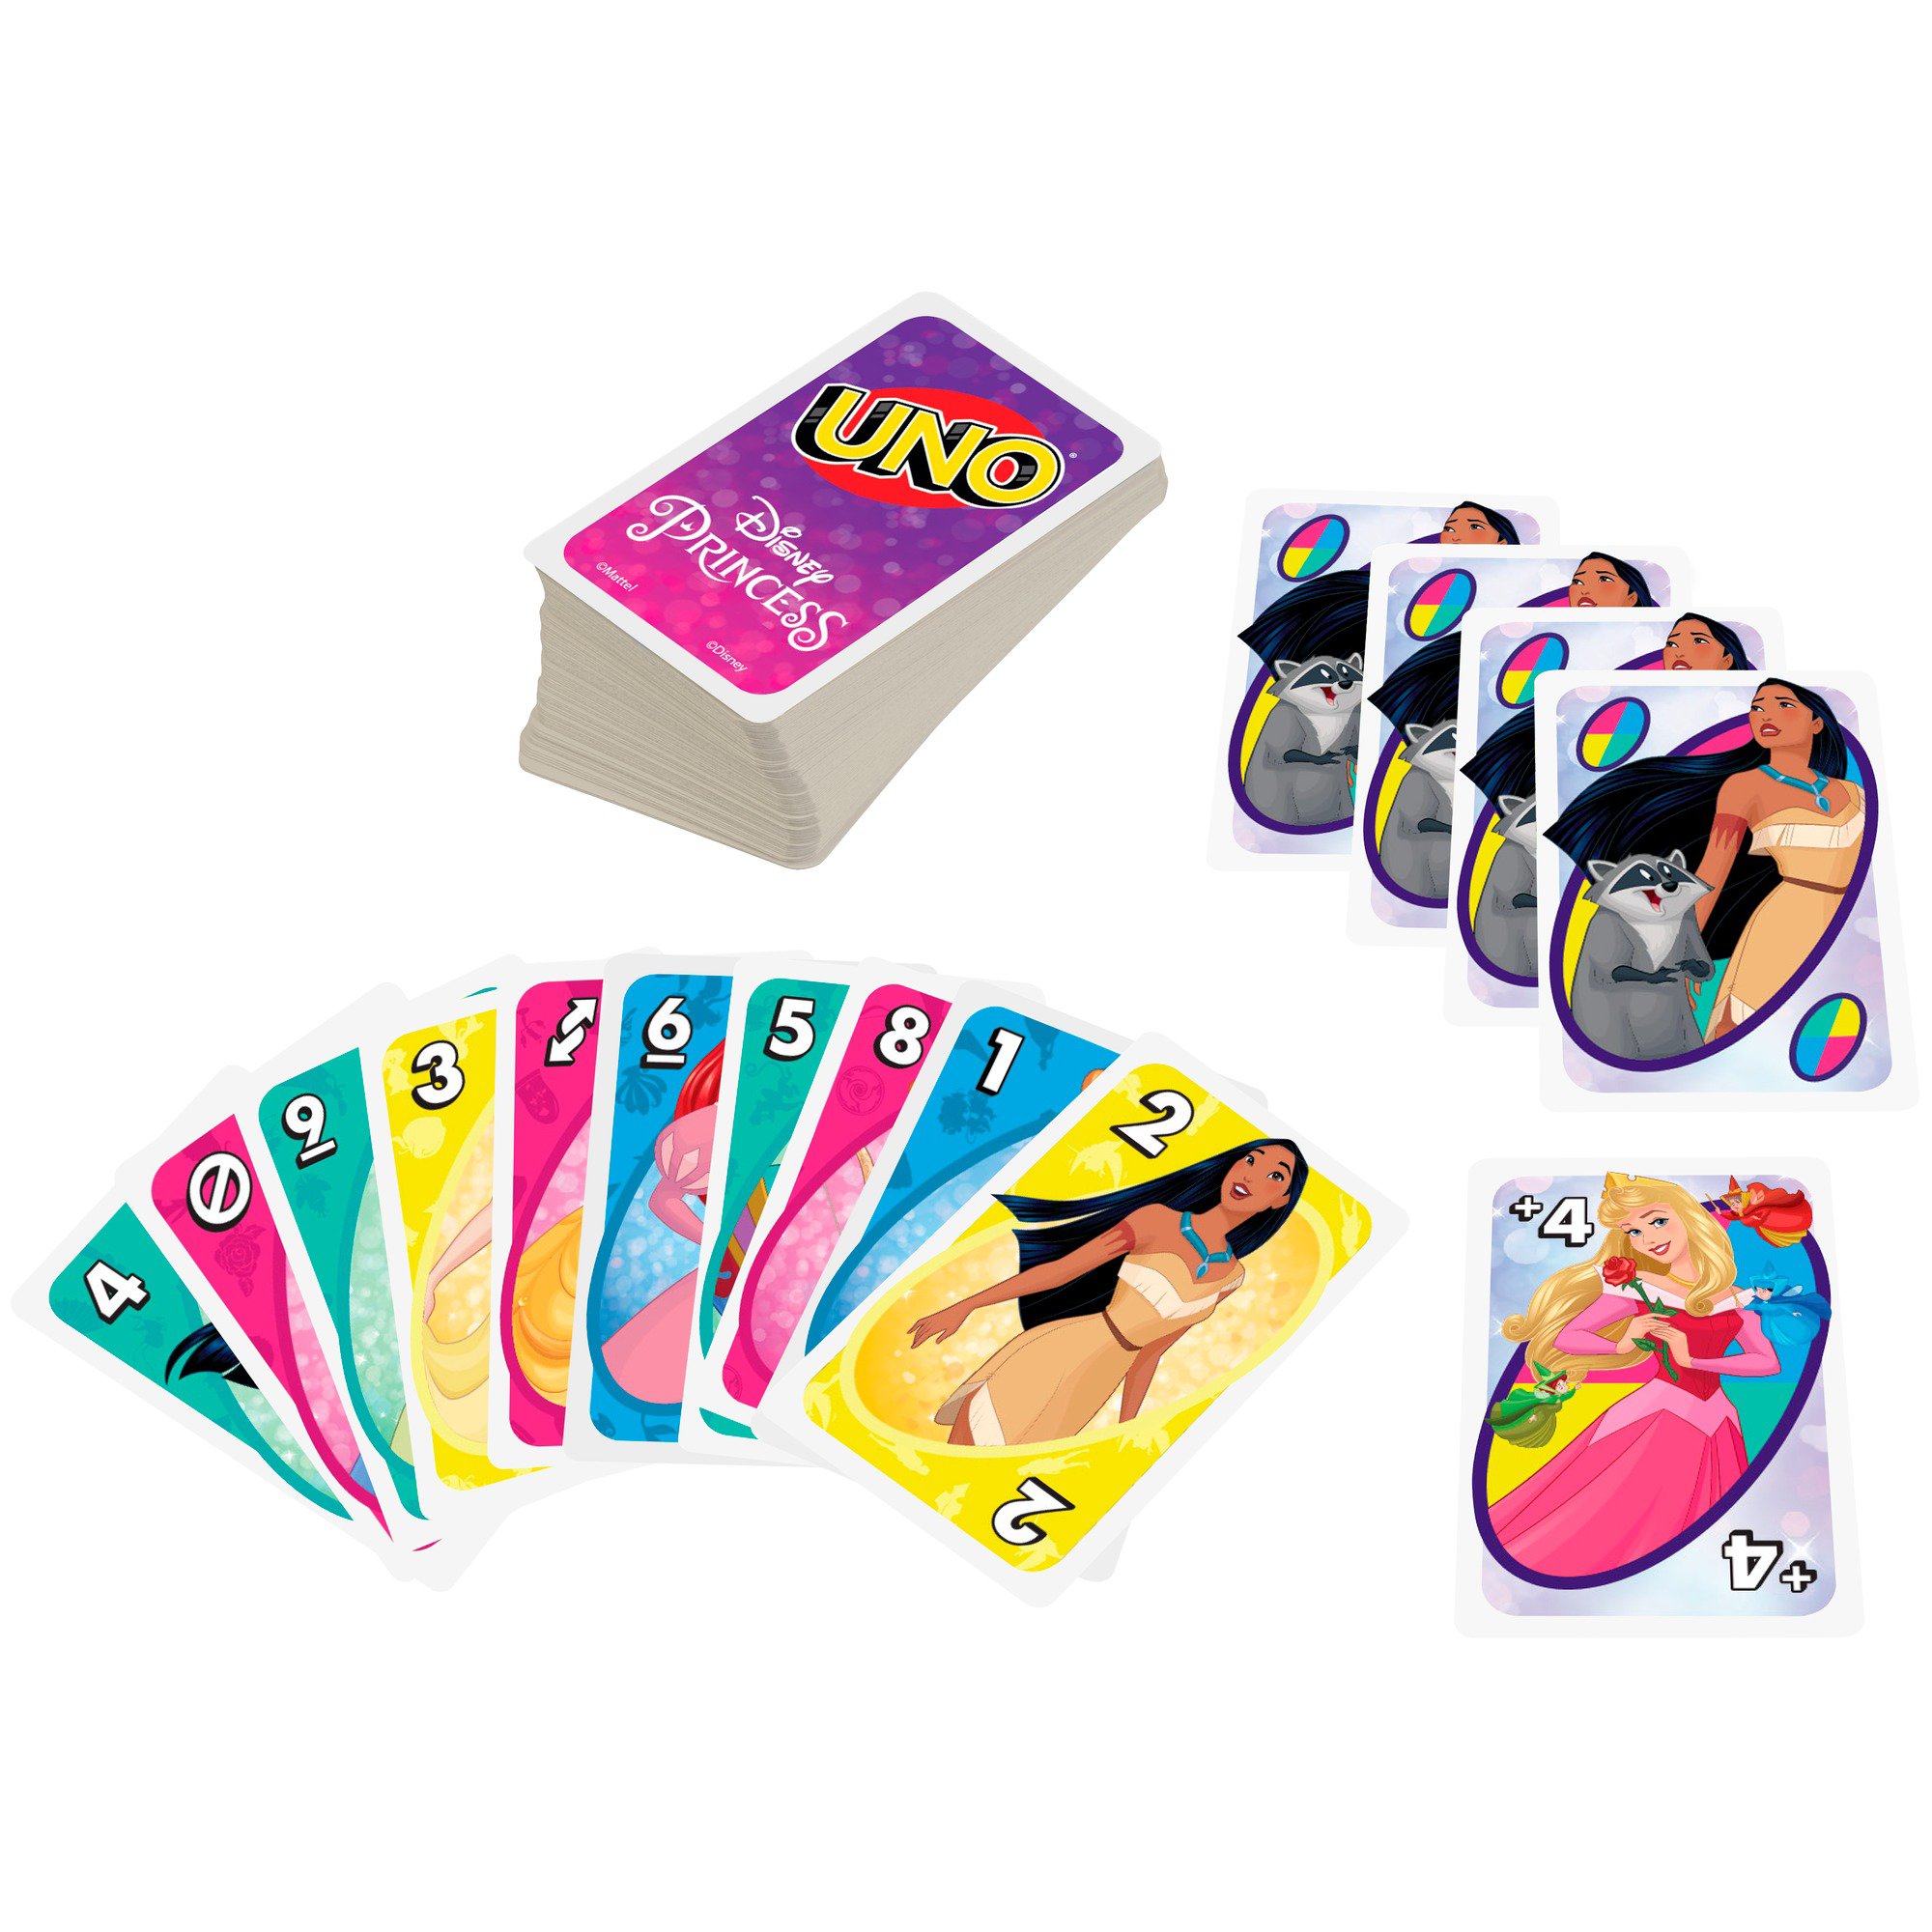 UNO Star Wars Edition Card Game - Shop Games at H-E-B